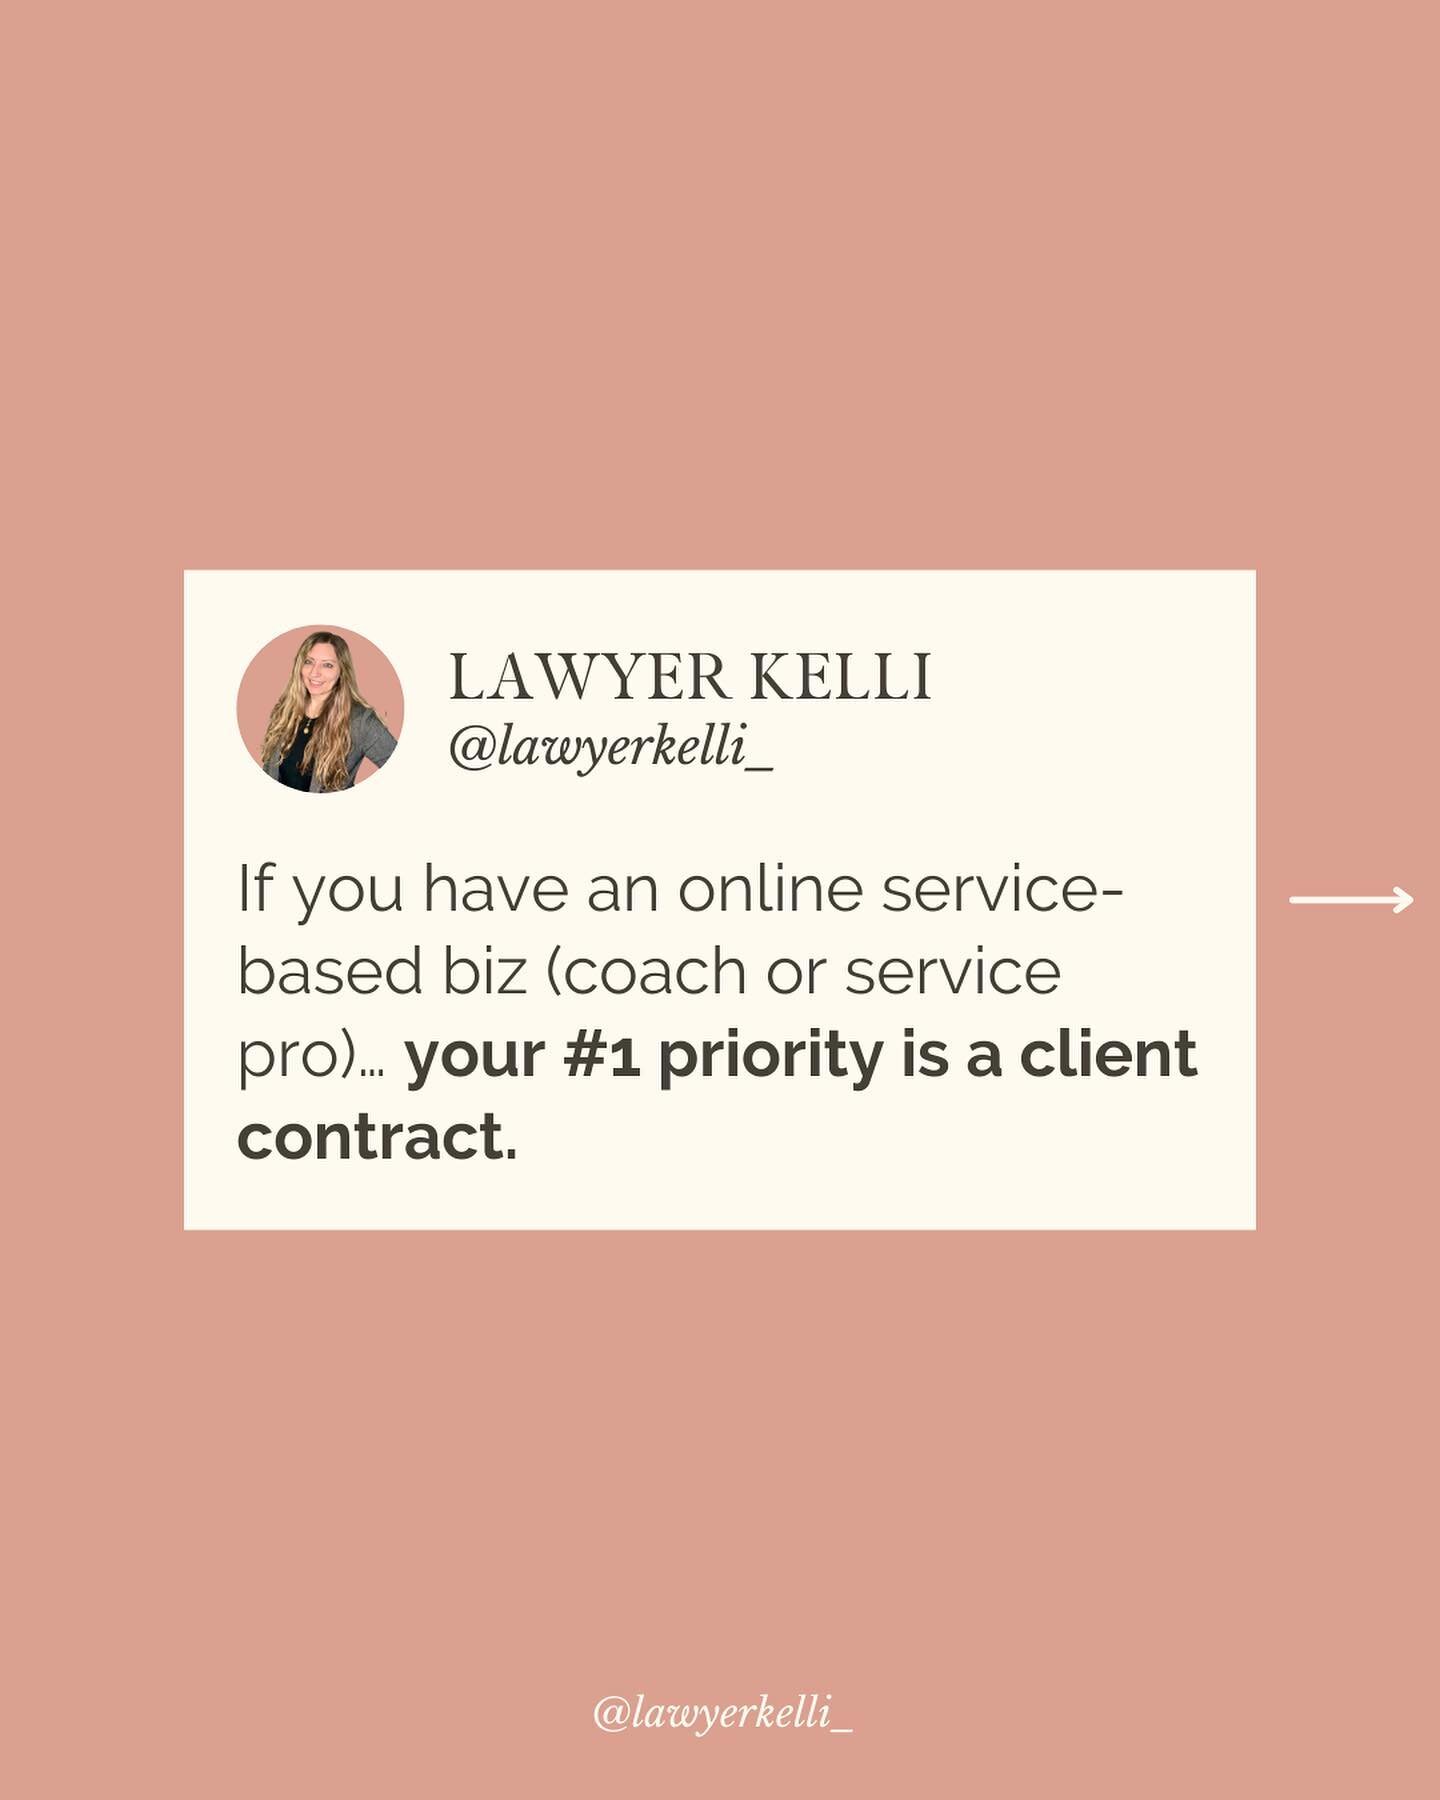 📣 If you can&rsquo;t afford a client contract from a lawyer (or lawyer drafted template), you can&rsquo;t afford anything else in your biz yet ‼️

I&rsquo;m not saying this to discourage you or shame you. I&rsquo;m saying it because without a contra